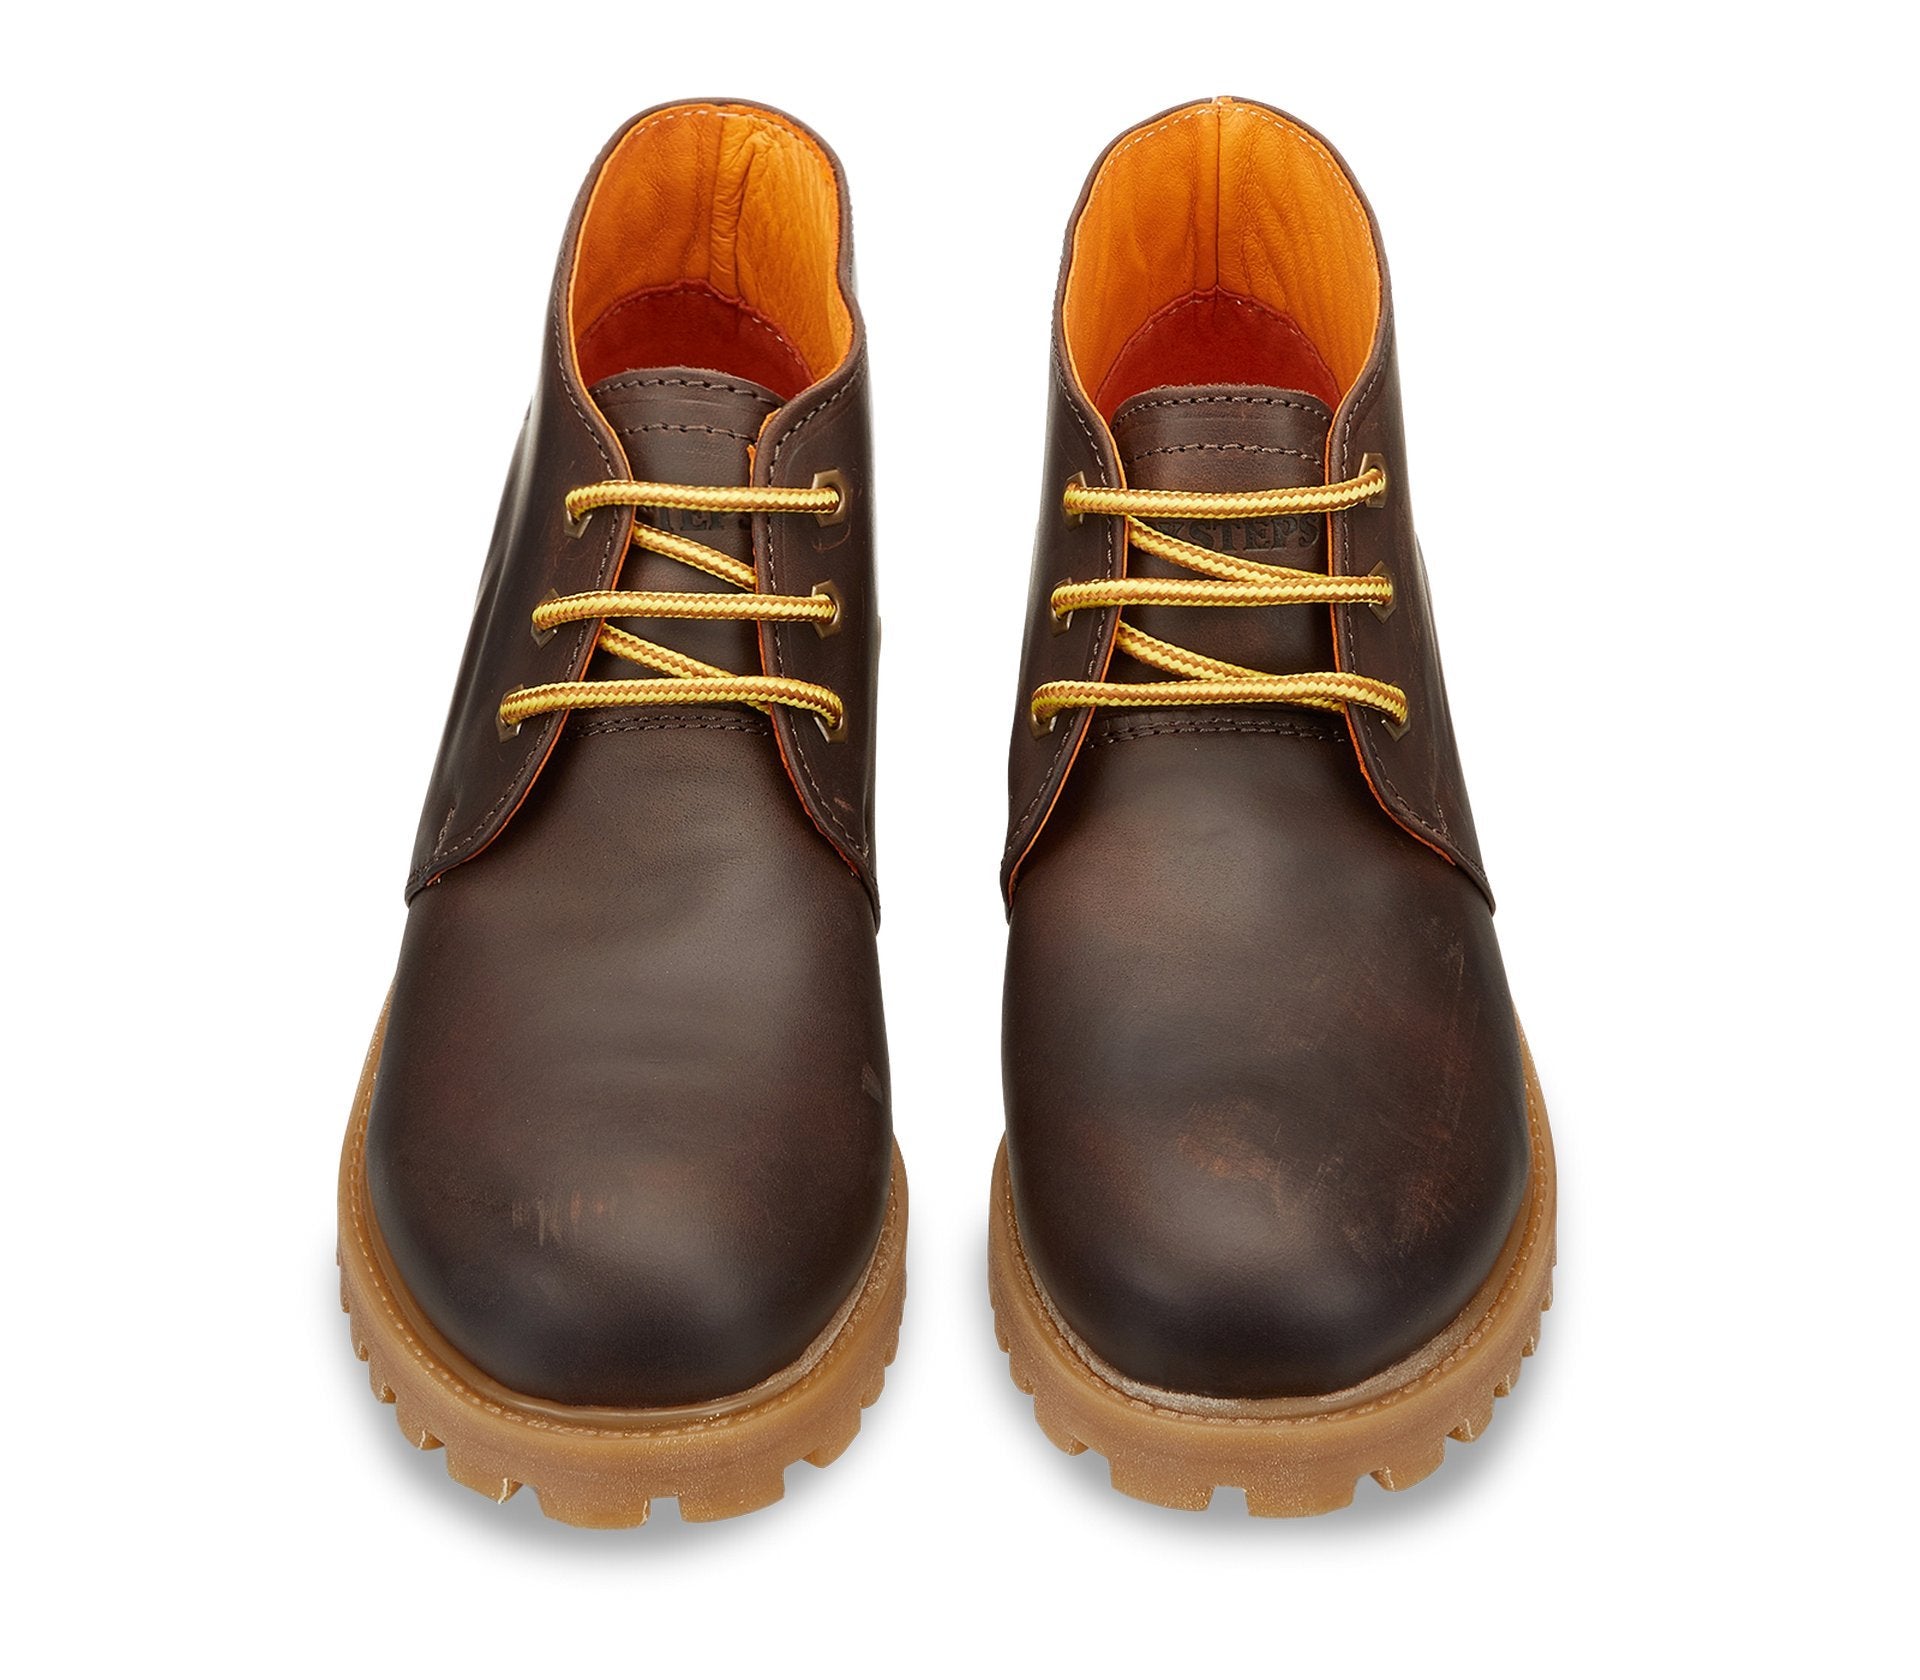 Men's leather lace-up boot